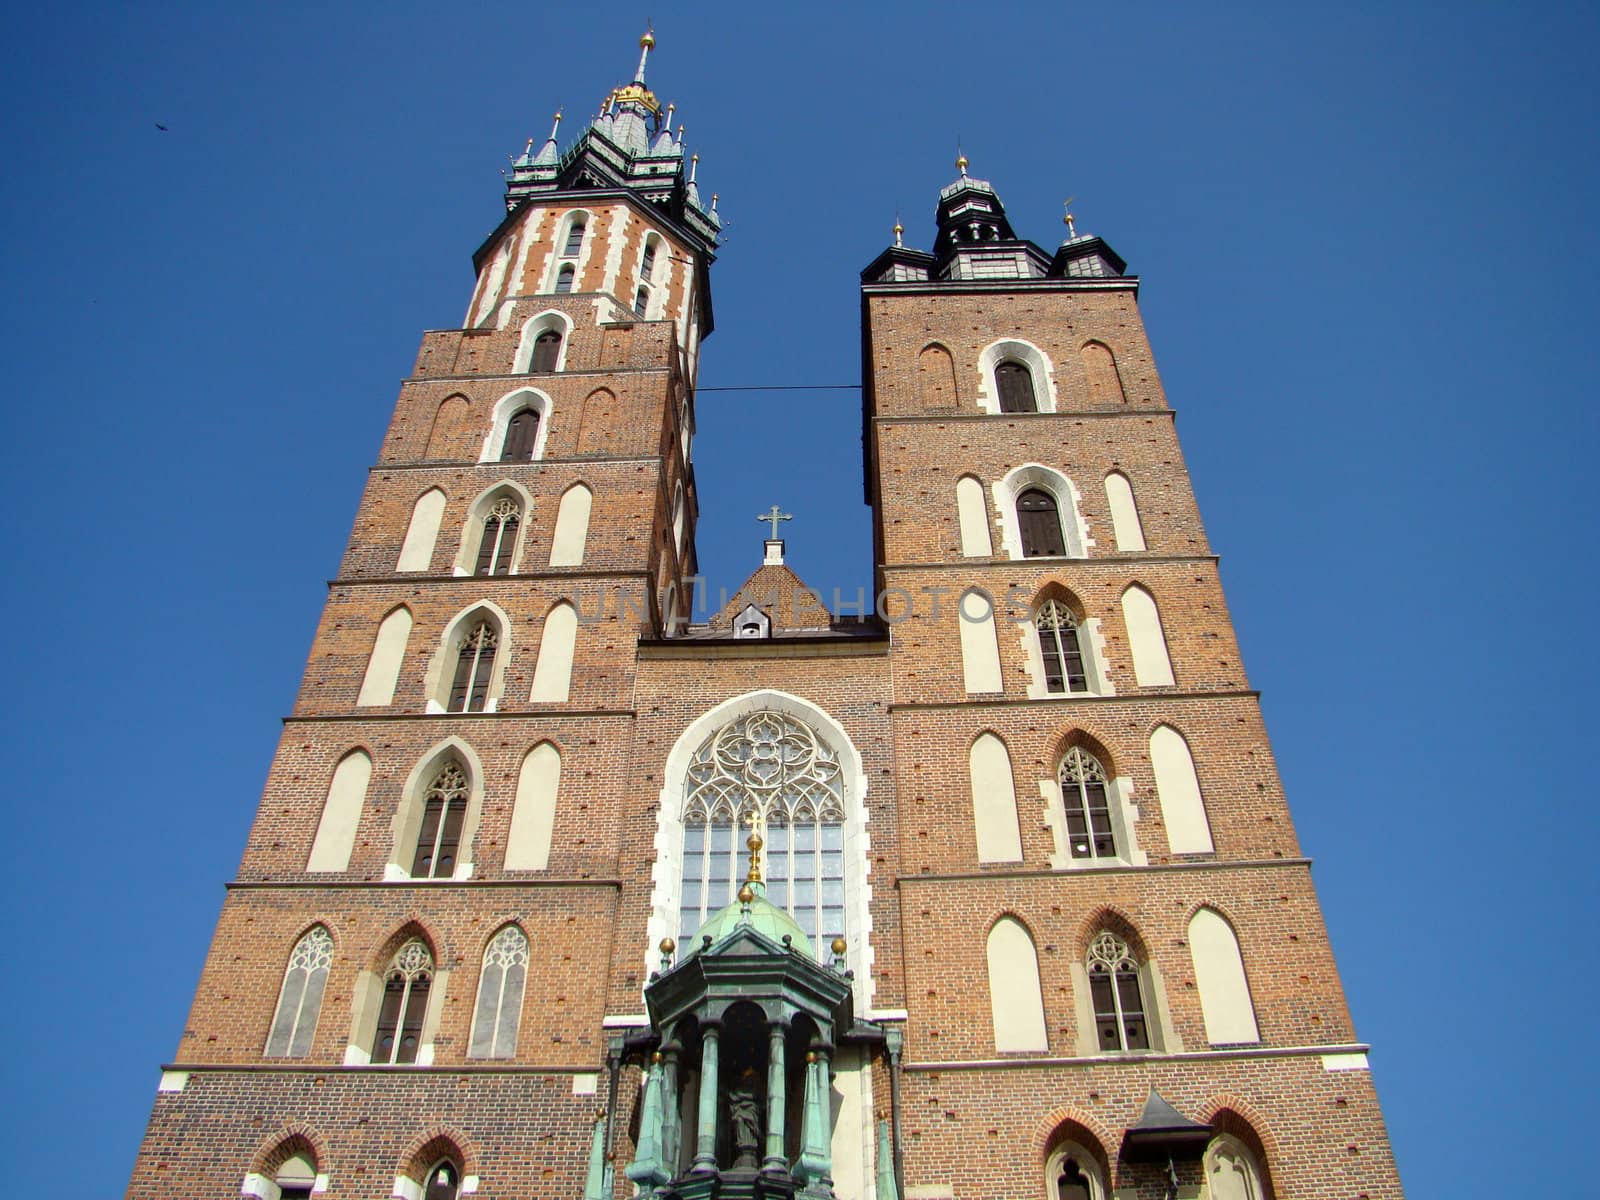 St. Mary's Basilica (Polish: Kościół Mariacki). Brick Gothic church built in the 14th century adjacent to the Main Market Square in Cracow Poland Europe 2008.